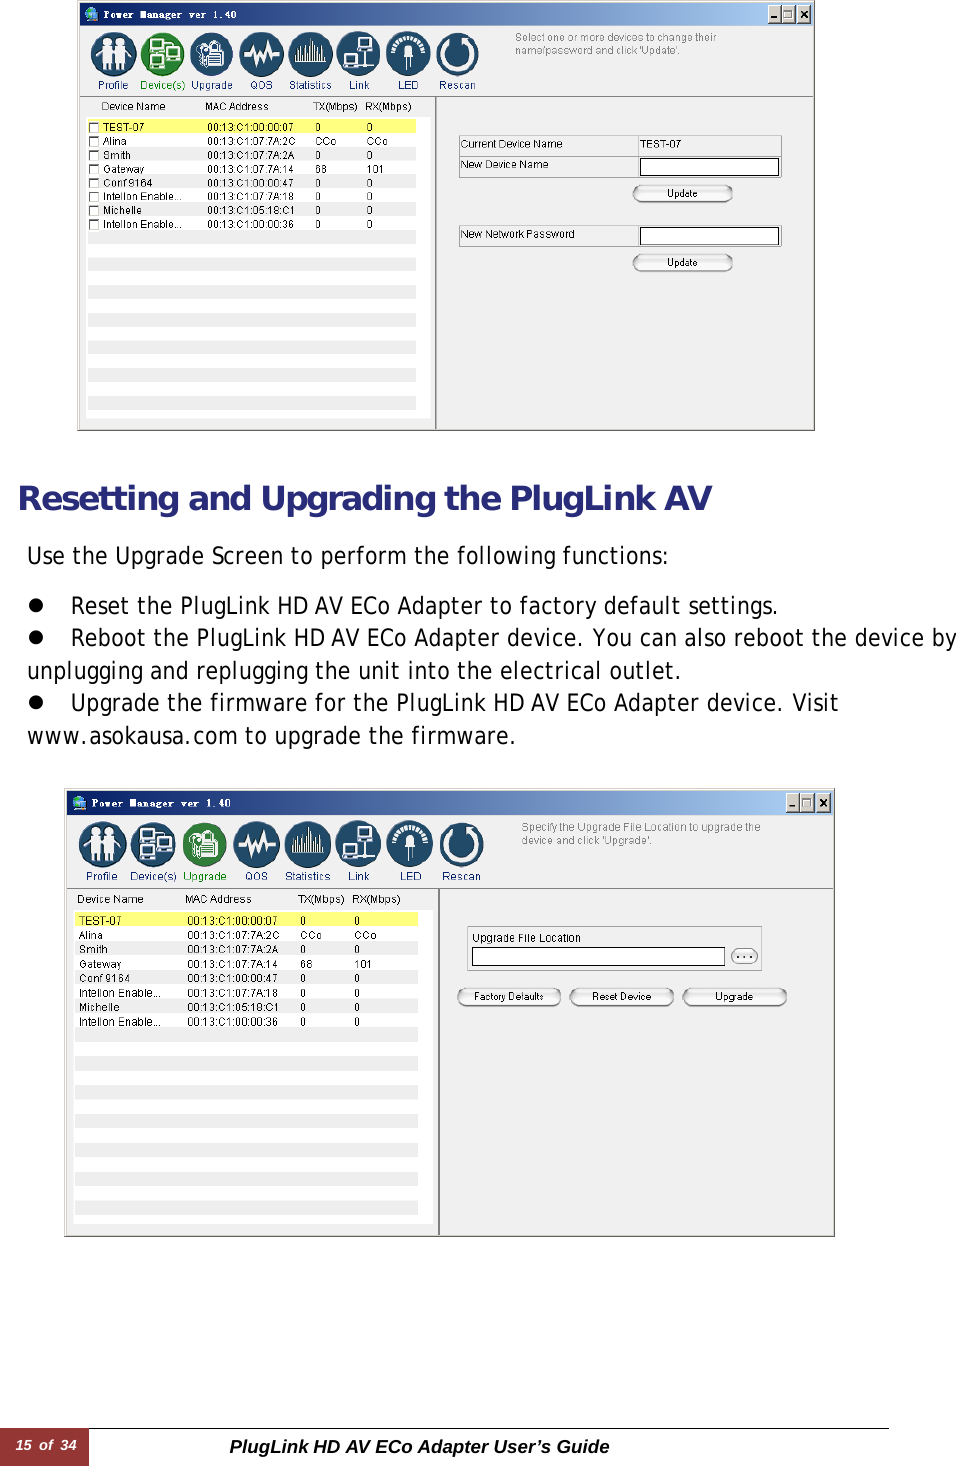 15 of 34  PlugLink HD AV ECo Adapter User’s Guide z Reset the PlugLink HD AV ECo Adapter to factory default settings.  z Reboot the PlugLink HD AV ECo Adapter device. You can also reboot the device by unplugging and replugging the unit into the electrical outlet.  z Upgrade the firmware for the PlugLink HD AV ECo Adapter device. Visit   www.asokausa.com to upgrade the firmware.  Use the Upgrade Screen to perform the following functions:  Resetting and Upgrading the PlugLink AV   